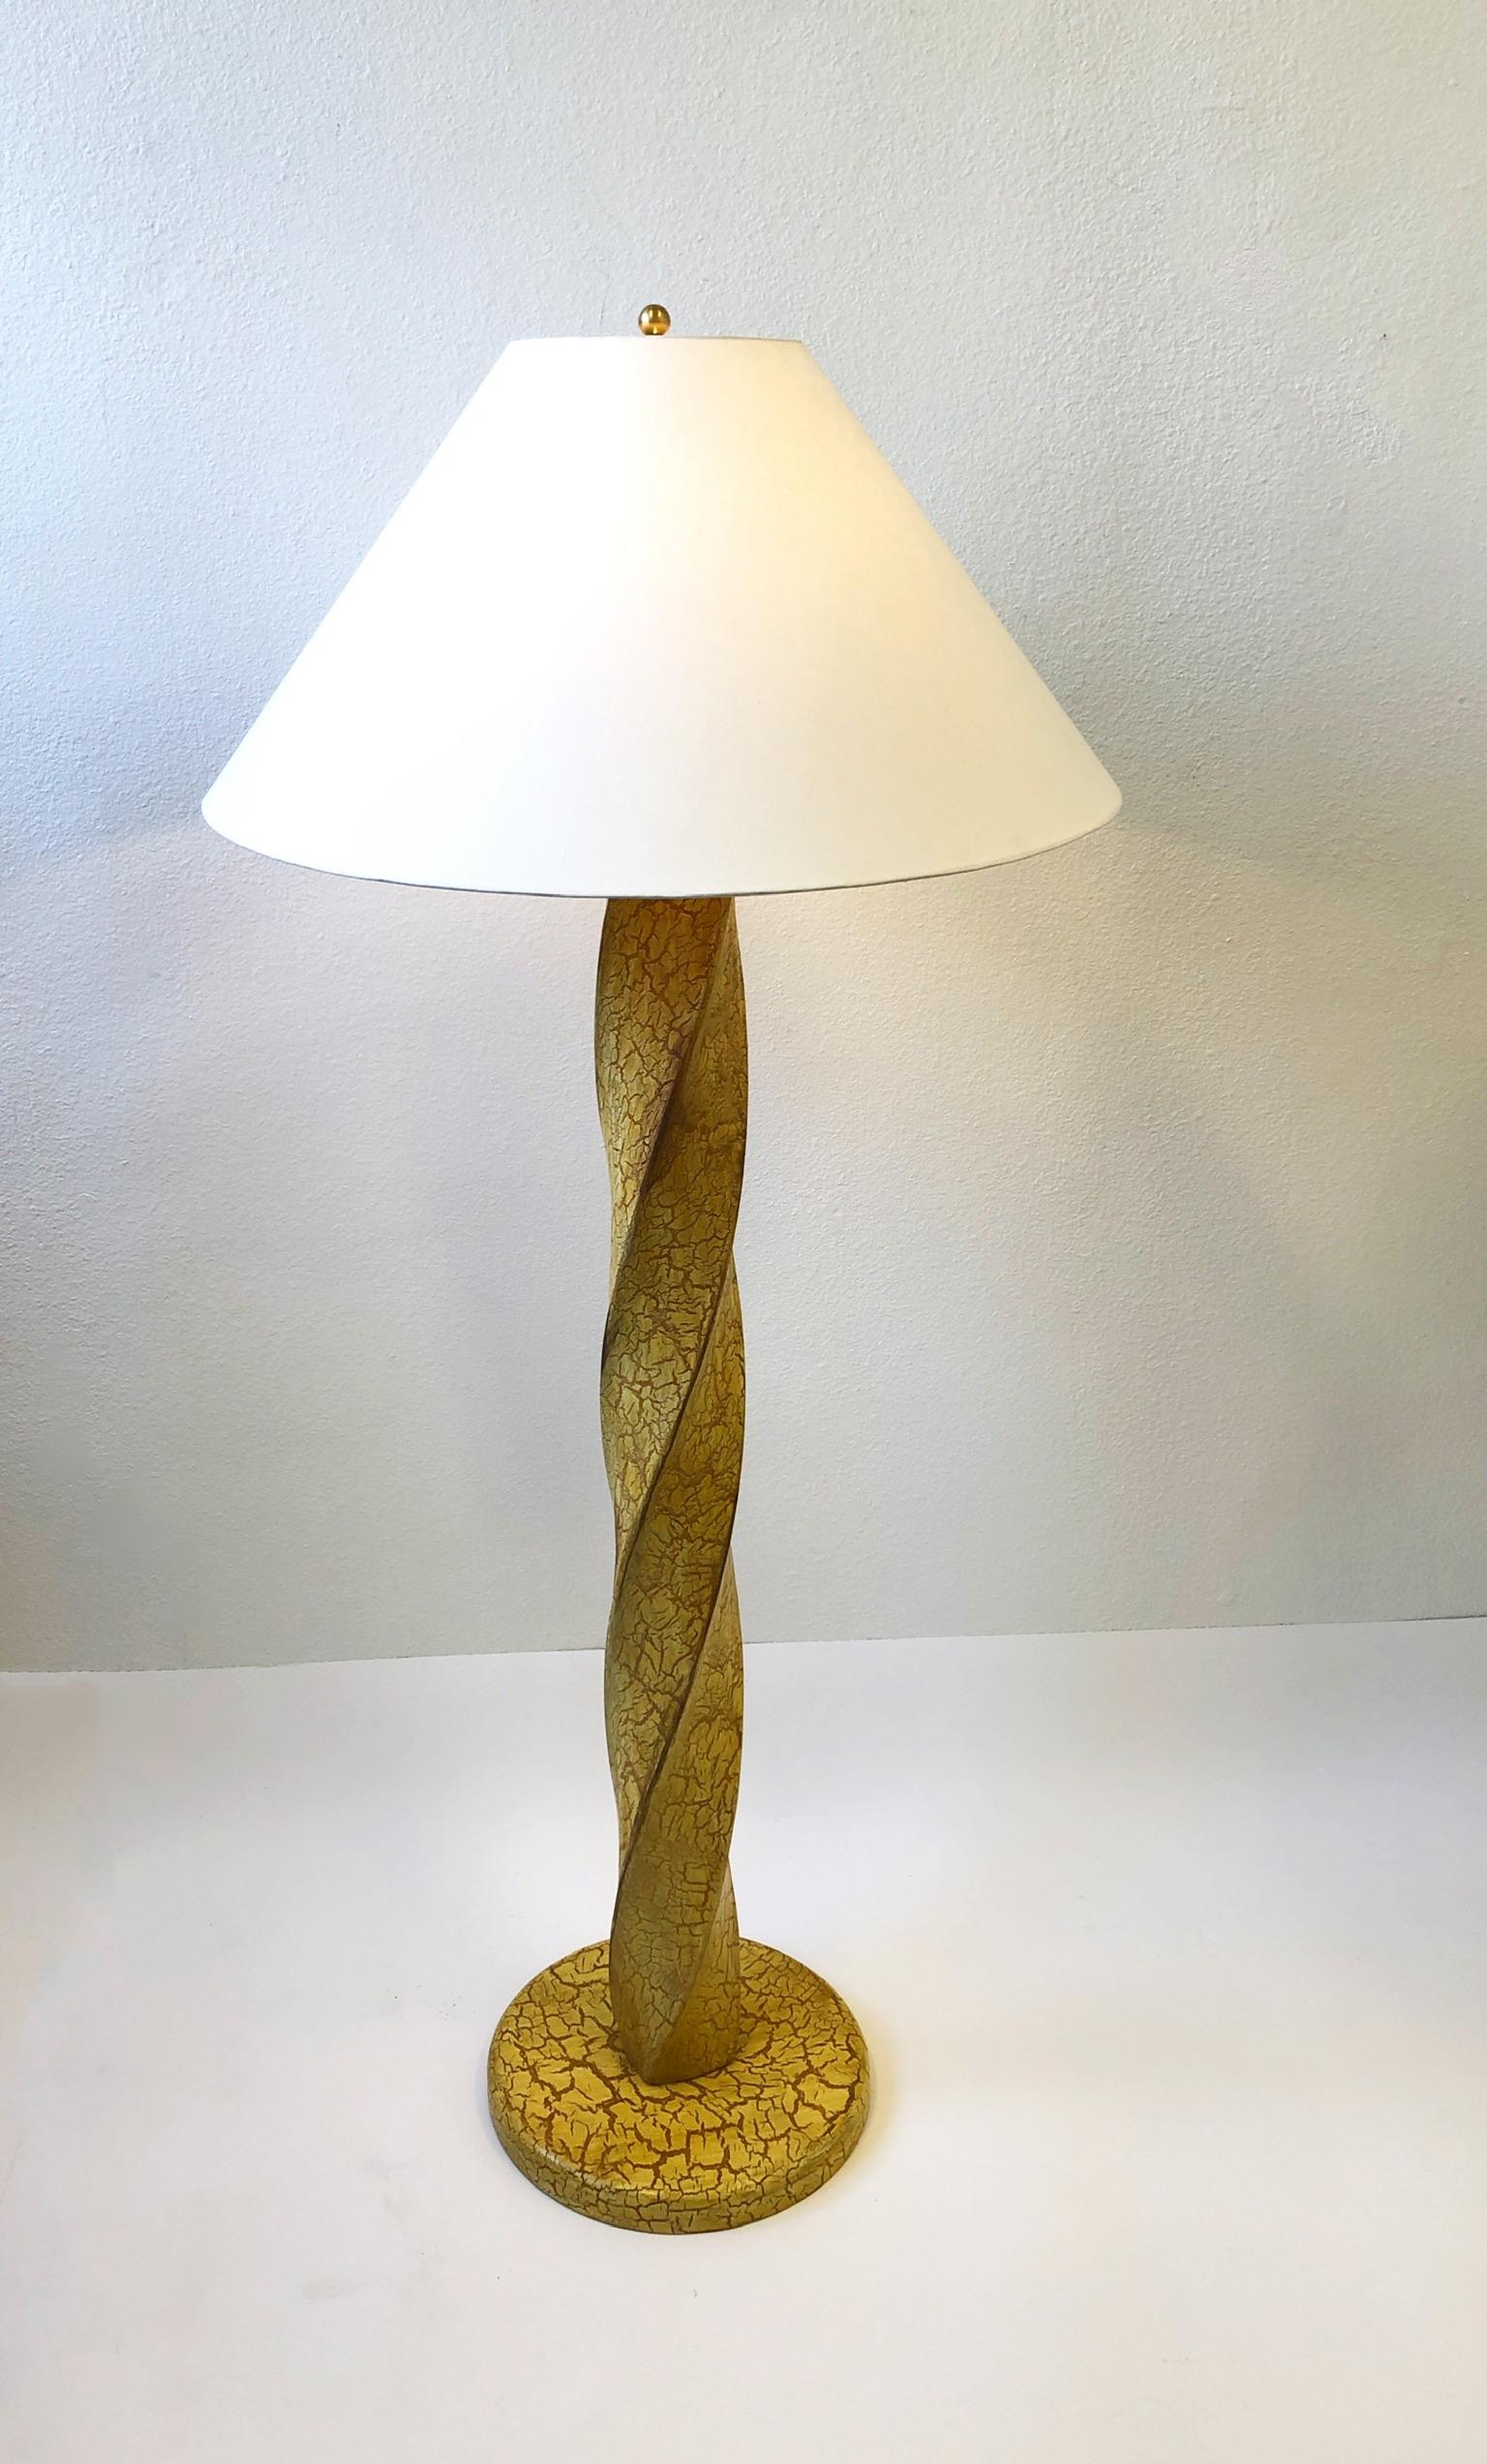 Lacquered Pair of Hand Carved Wood Floor Lamps by Dana Creath Designs for Steve Chase